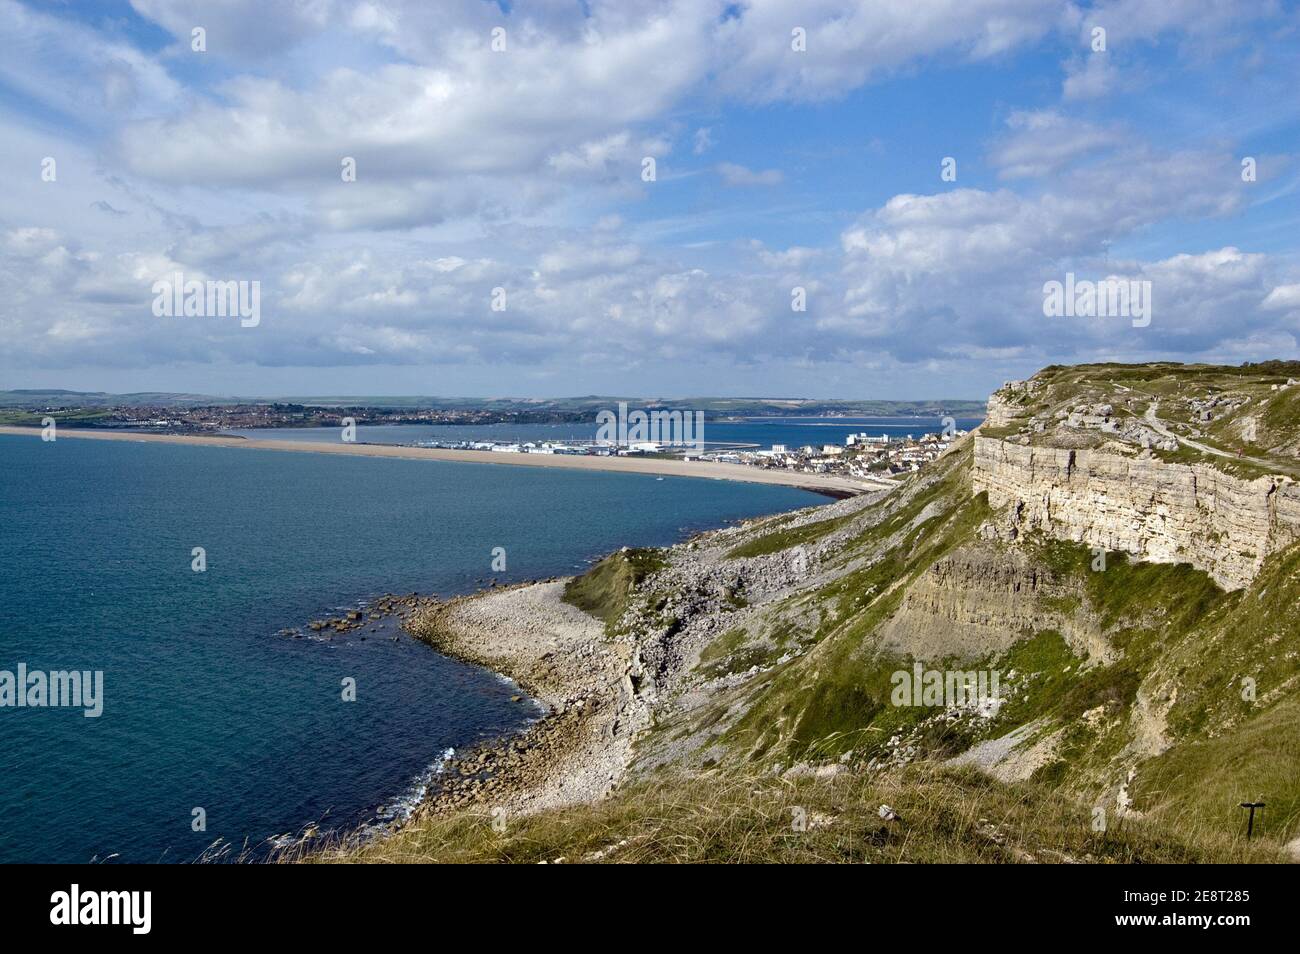 View from a stone quarry on the Isle of Portland looking across the Chesil Beach causeway to Weymouth on the Dorset Coast, England. Stock Photo